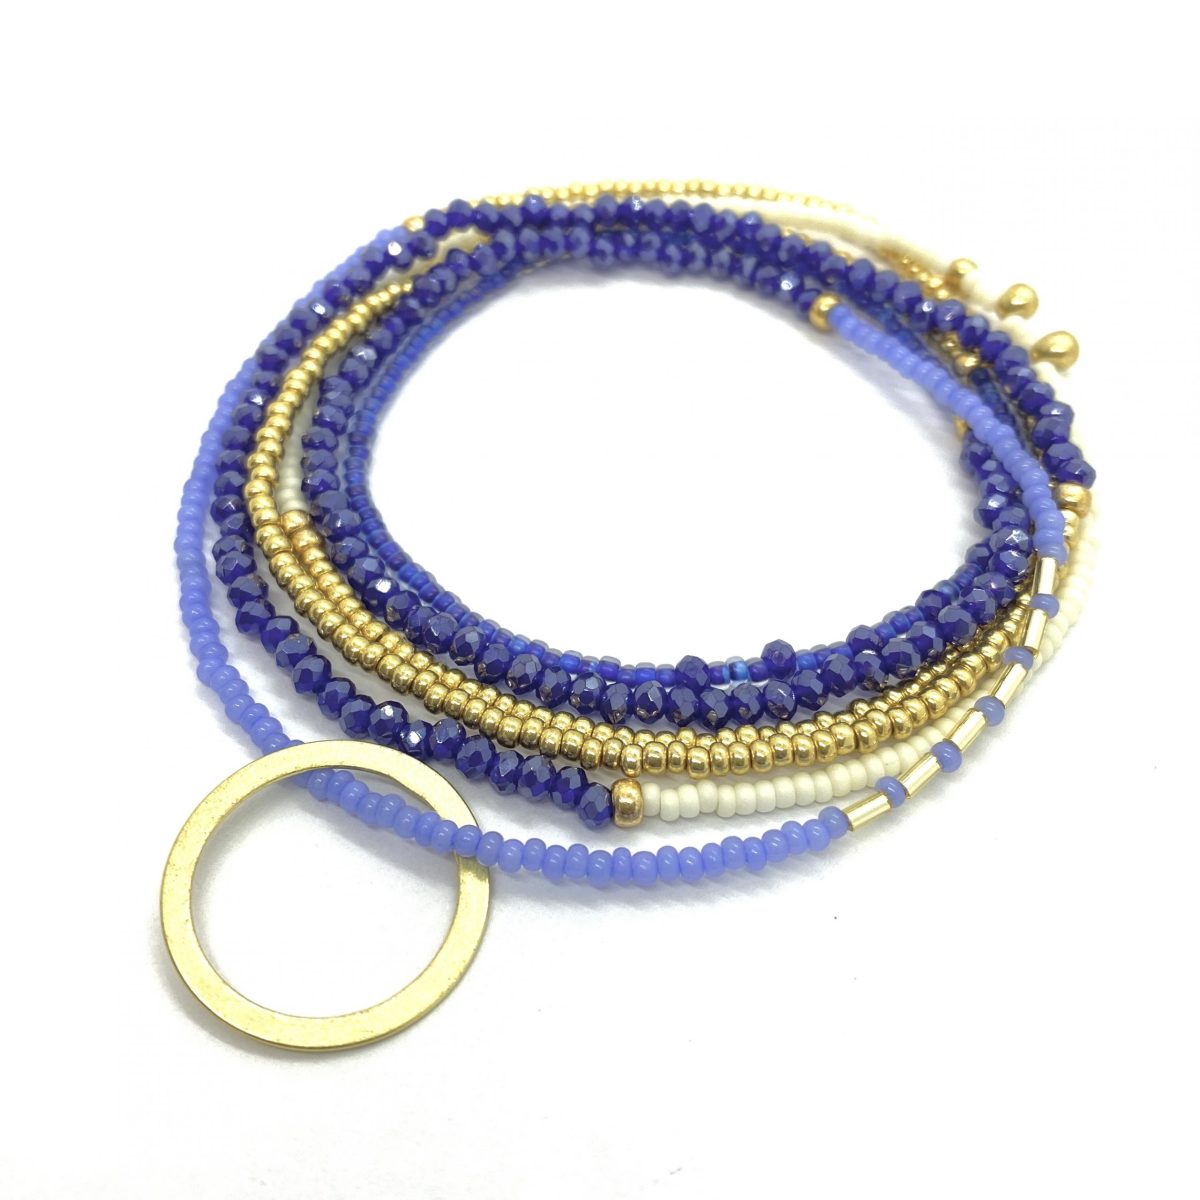 THE MAKERY HEART STRING LONG NECKLACE IN NAVY LAVENDER AND GOLD